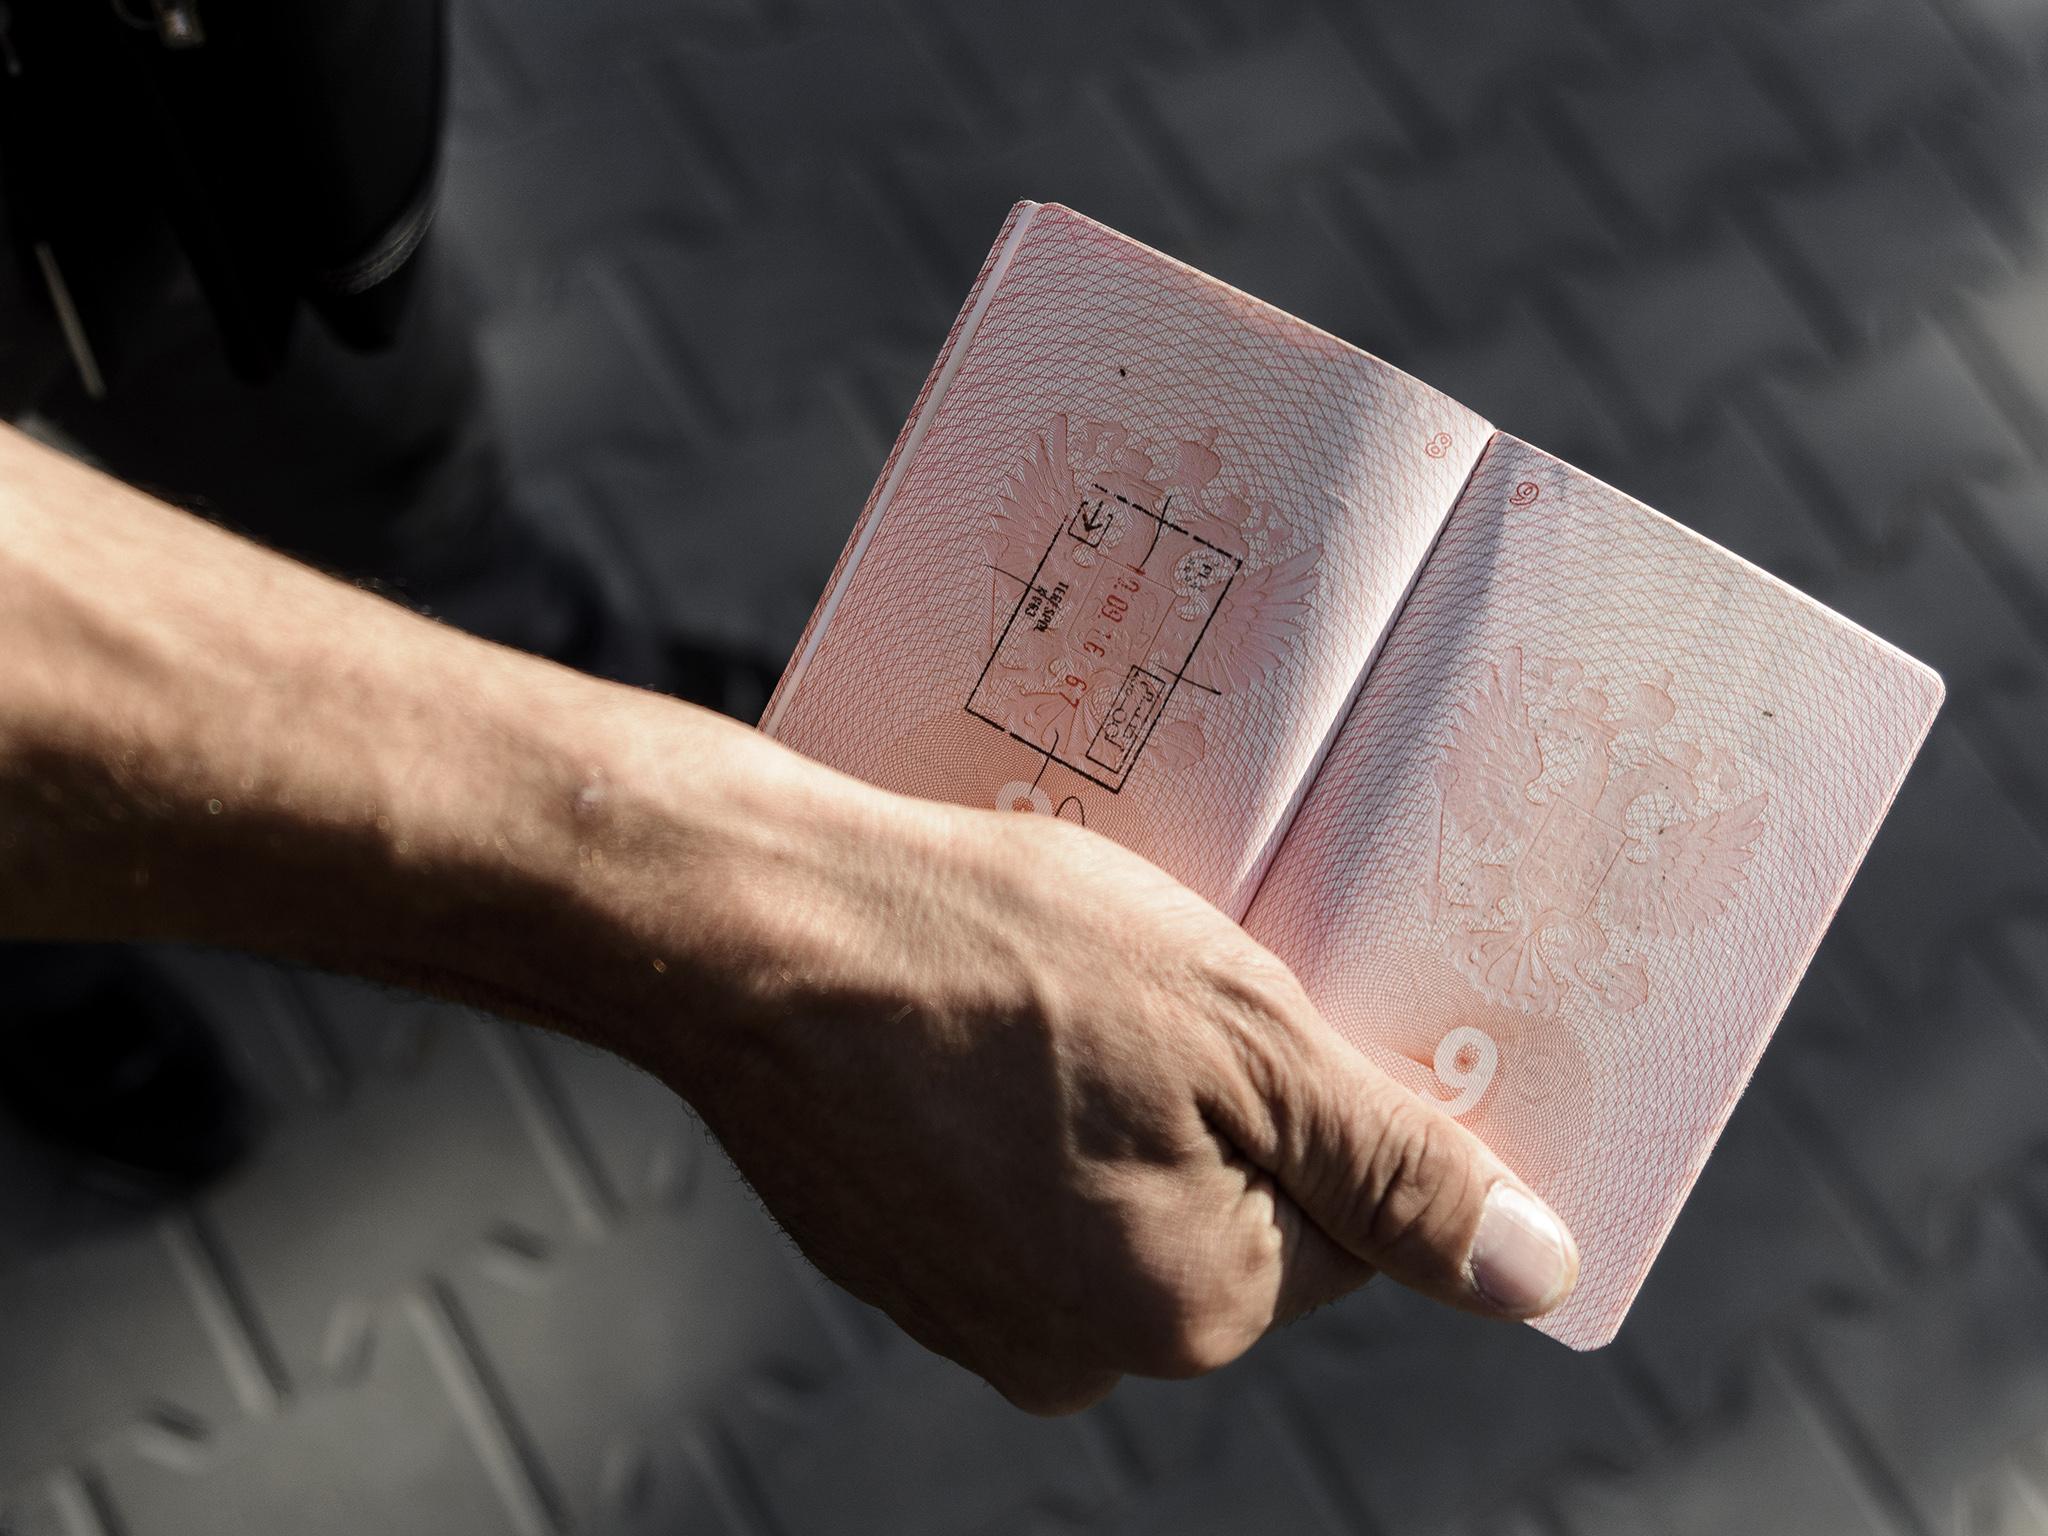 Polish border guards quickly fill Chechens’ passports with denied-entry stamps. The asylum seekers must return to Russia for new passports